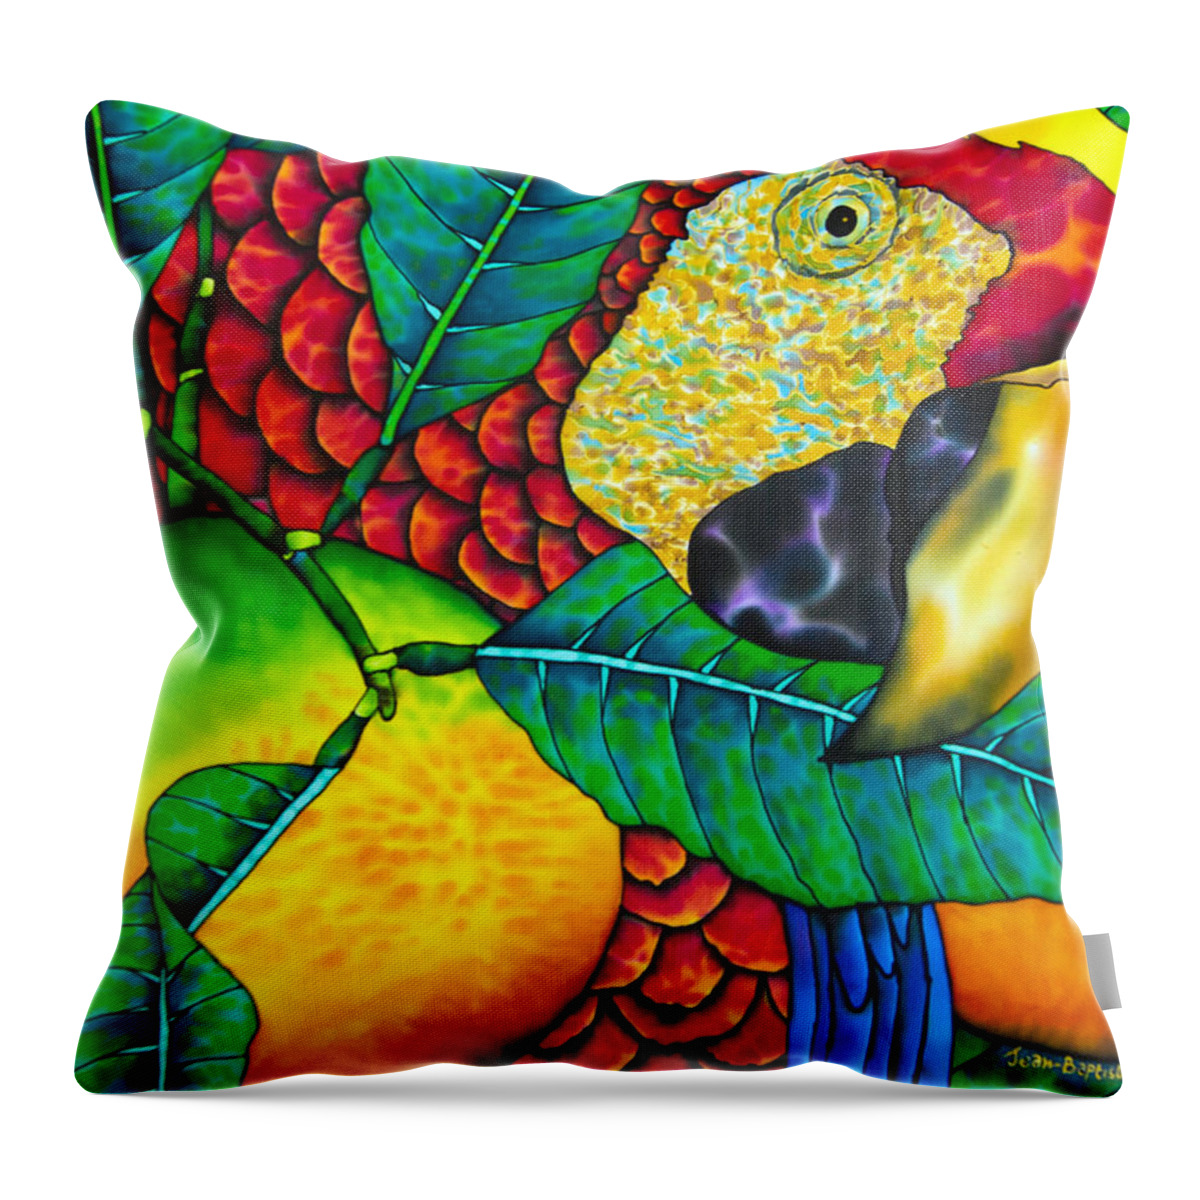 Jean-baptiste Design Throw Pillow featuring the painting Macaw Close Up - Exotic Bird by Daniel Jean-Baptiste